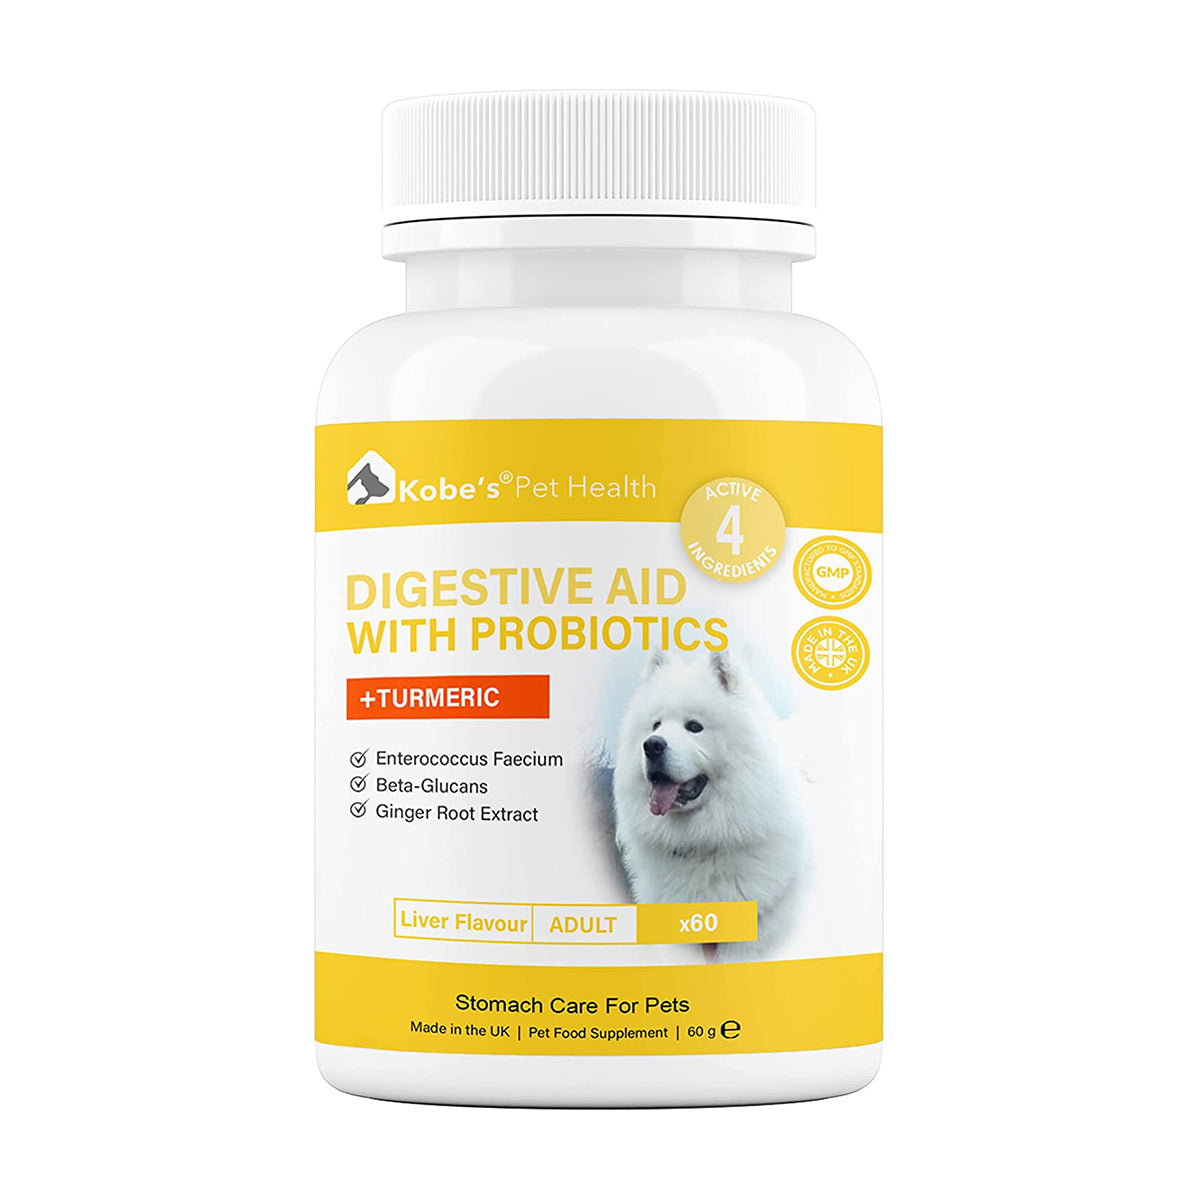 Digestive Enzyme Supplements For Dogs | Probiotics for Dogs | Digestive Enzyme for Dogs & Cats (Trial)